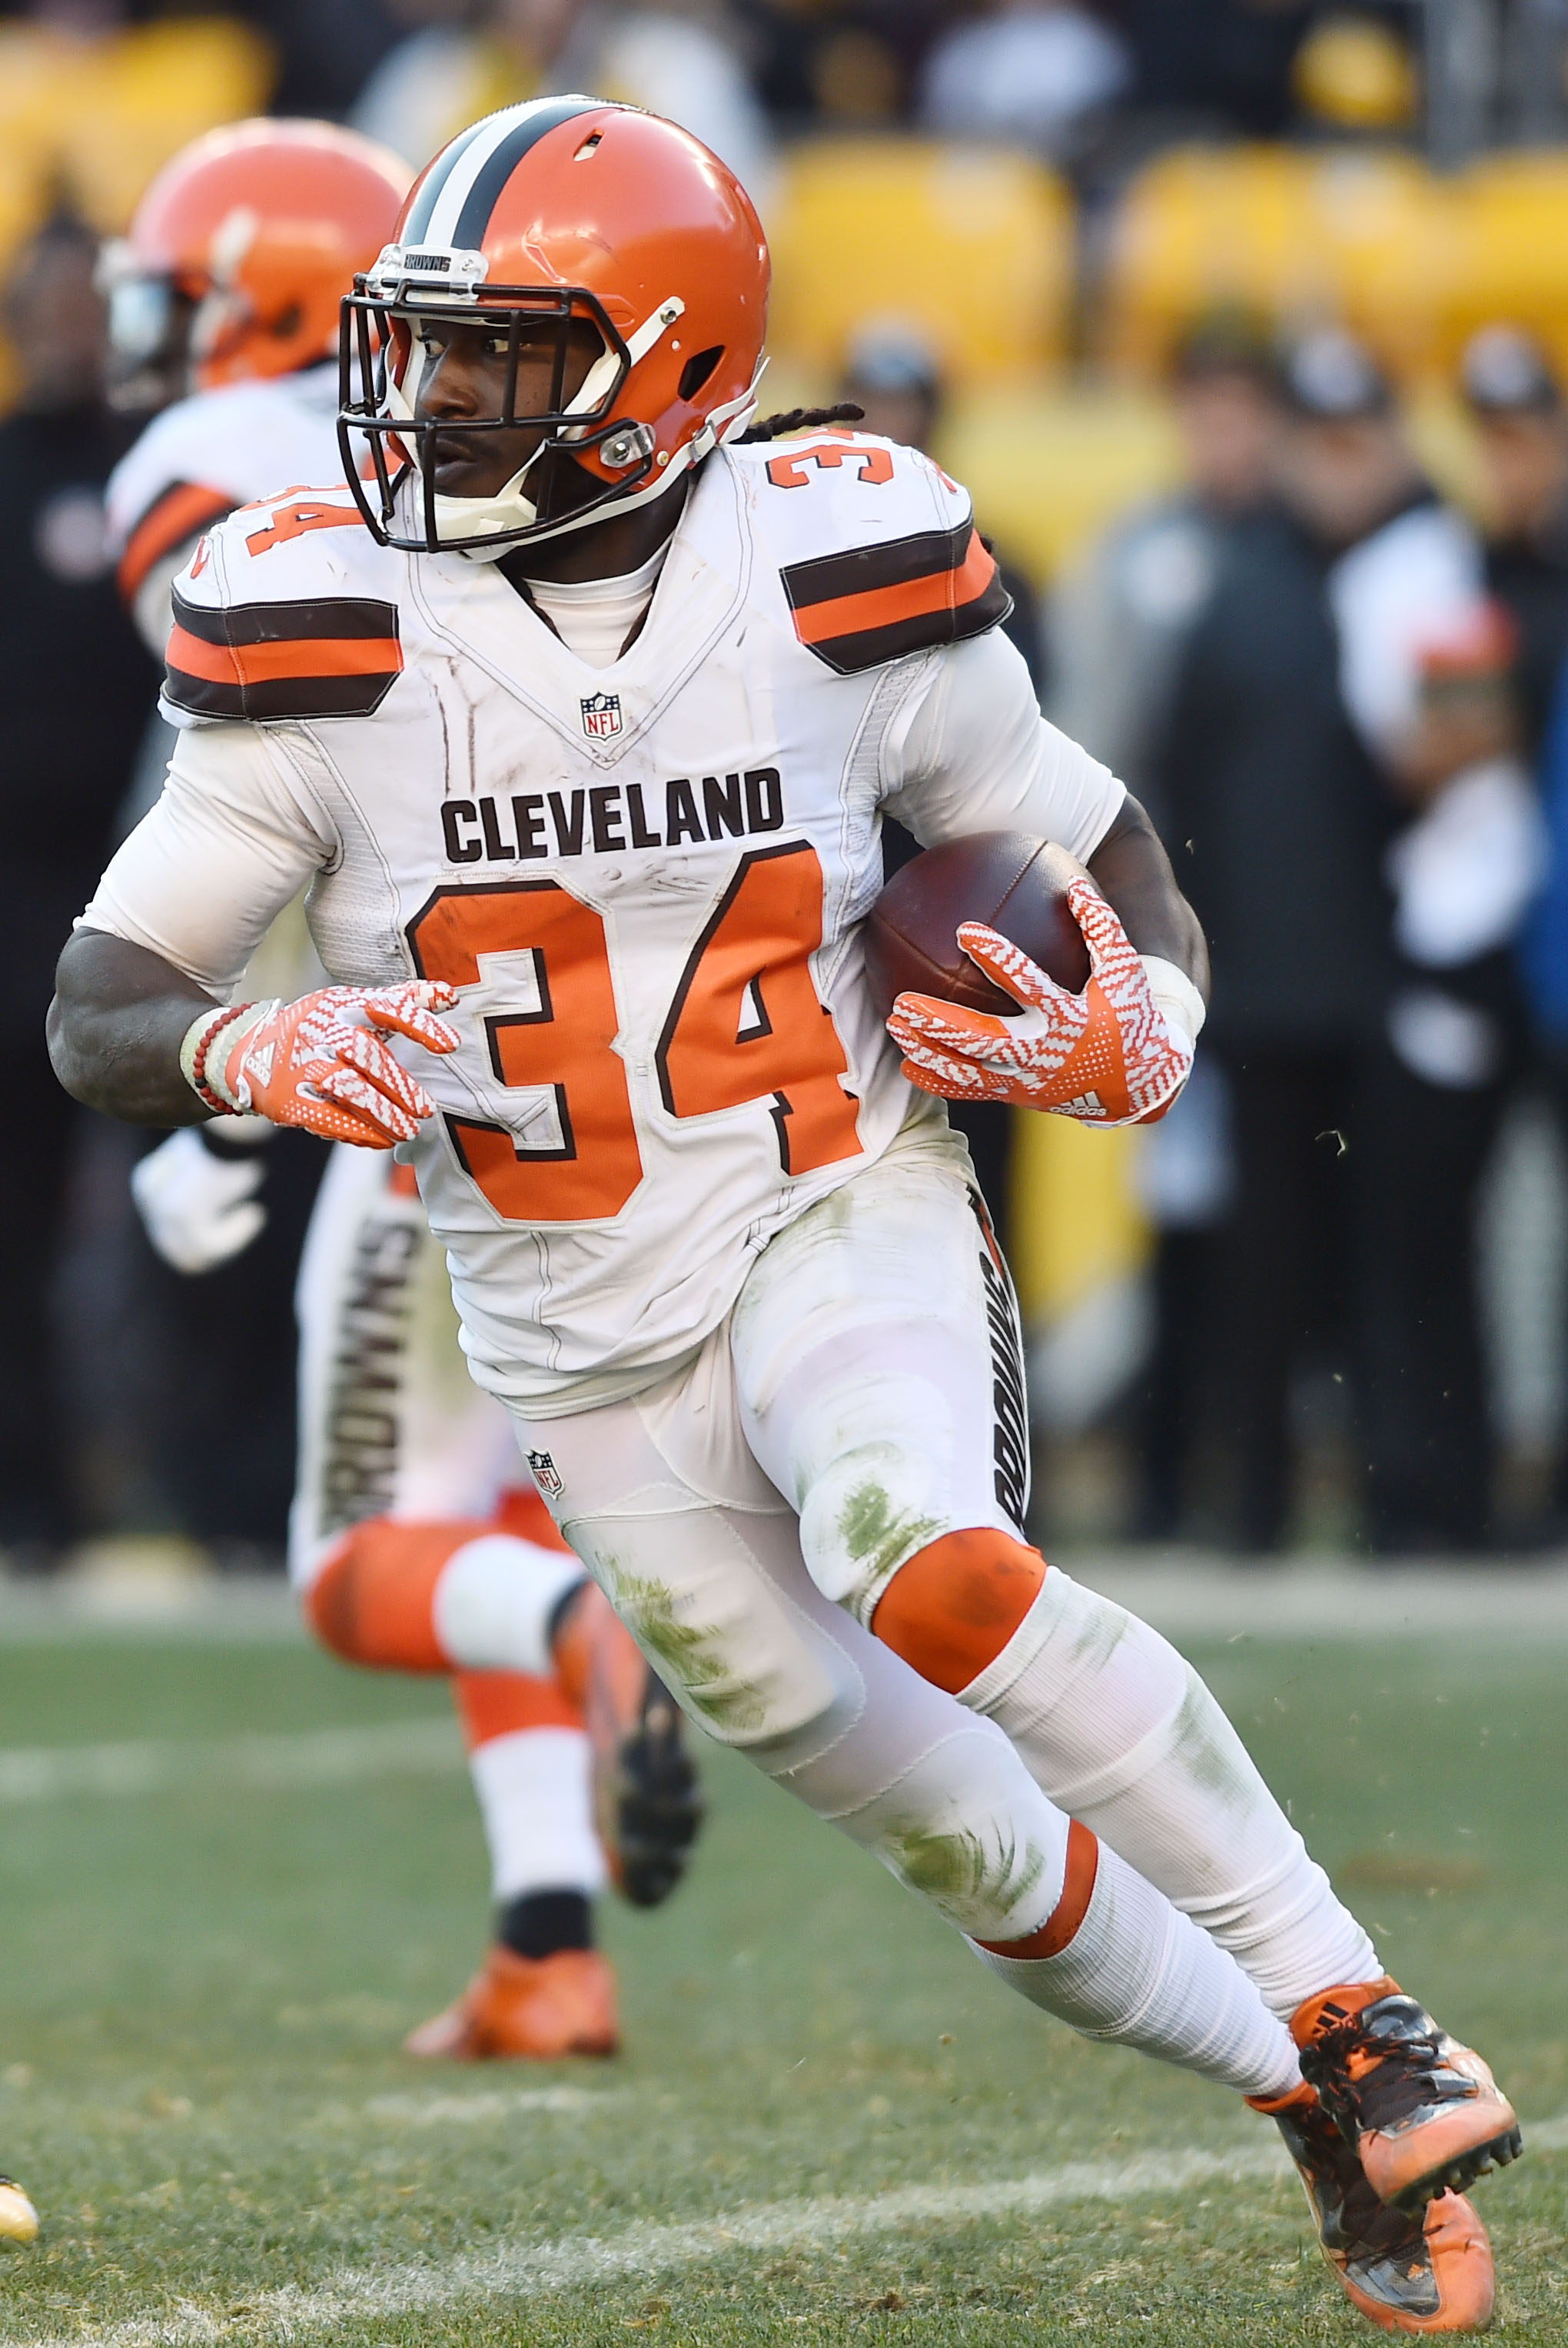 Browns, Isaiah Crowell At 